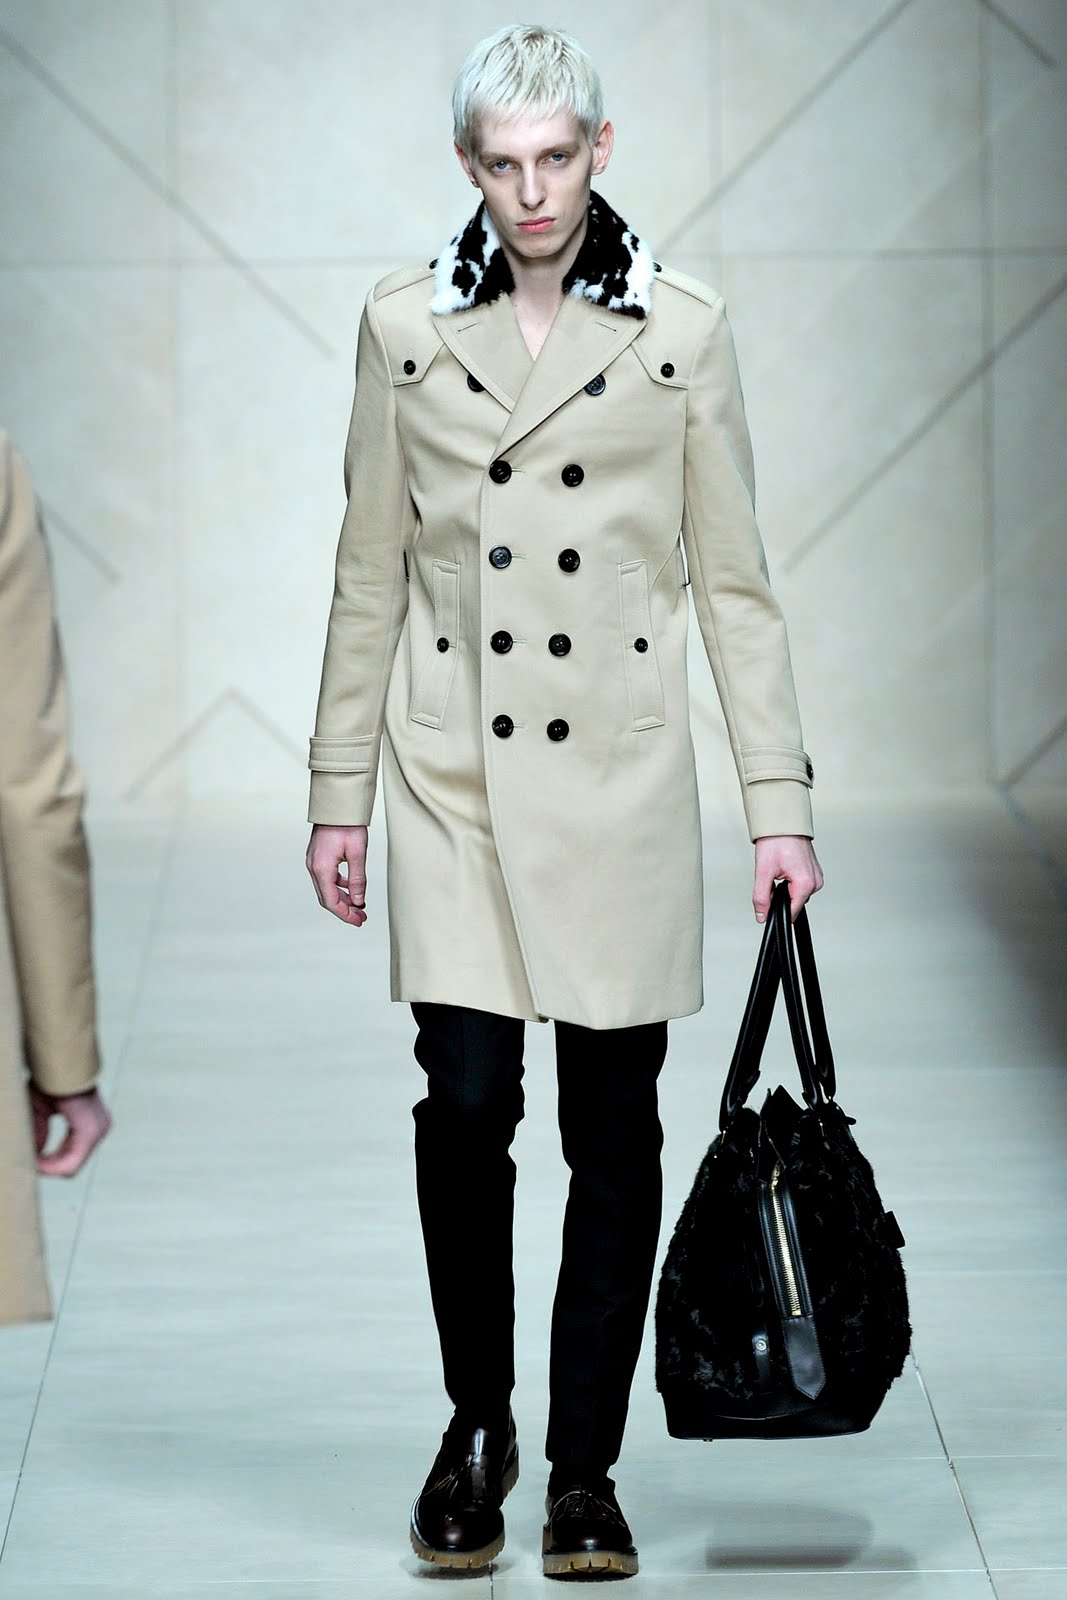 Wearable Trends: 12 Looks We Loved the Most from the Burberry Prorsum ...